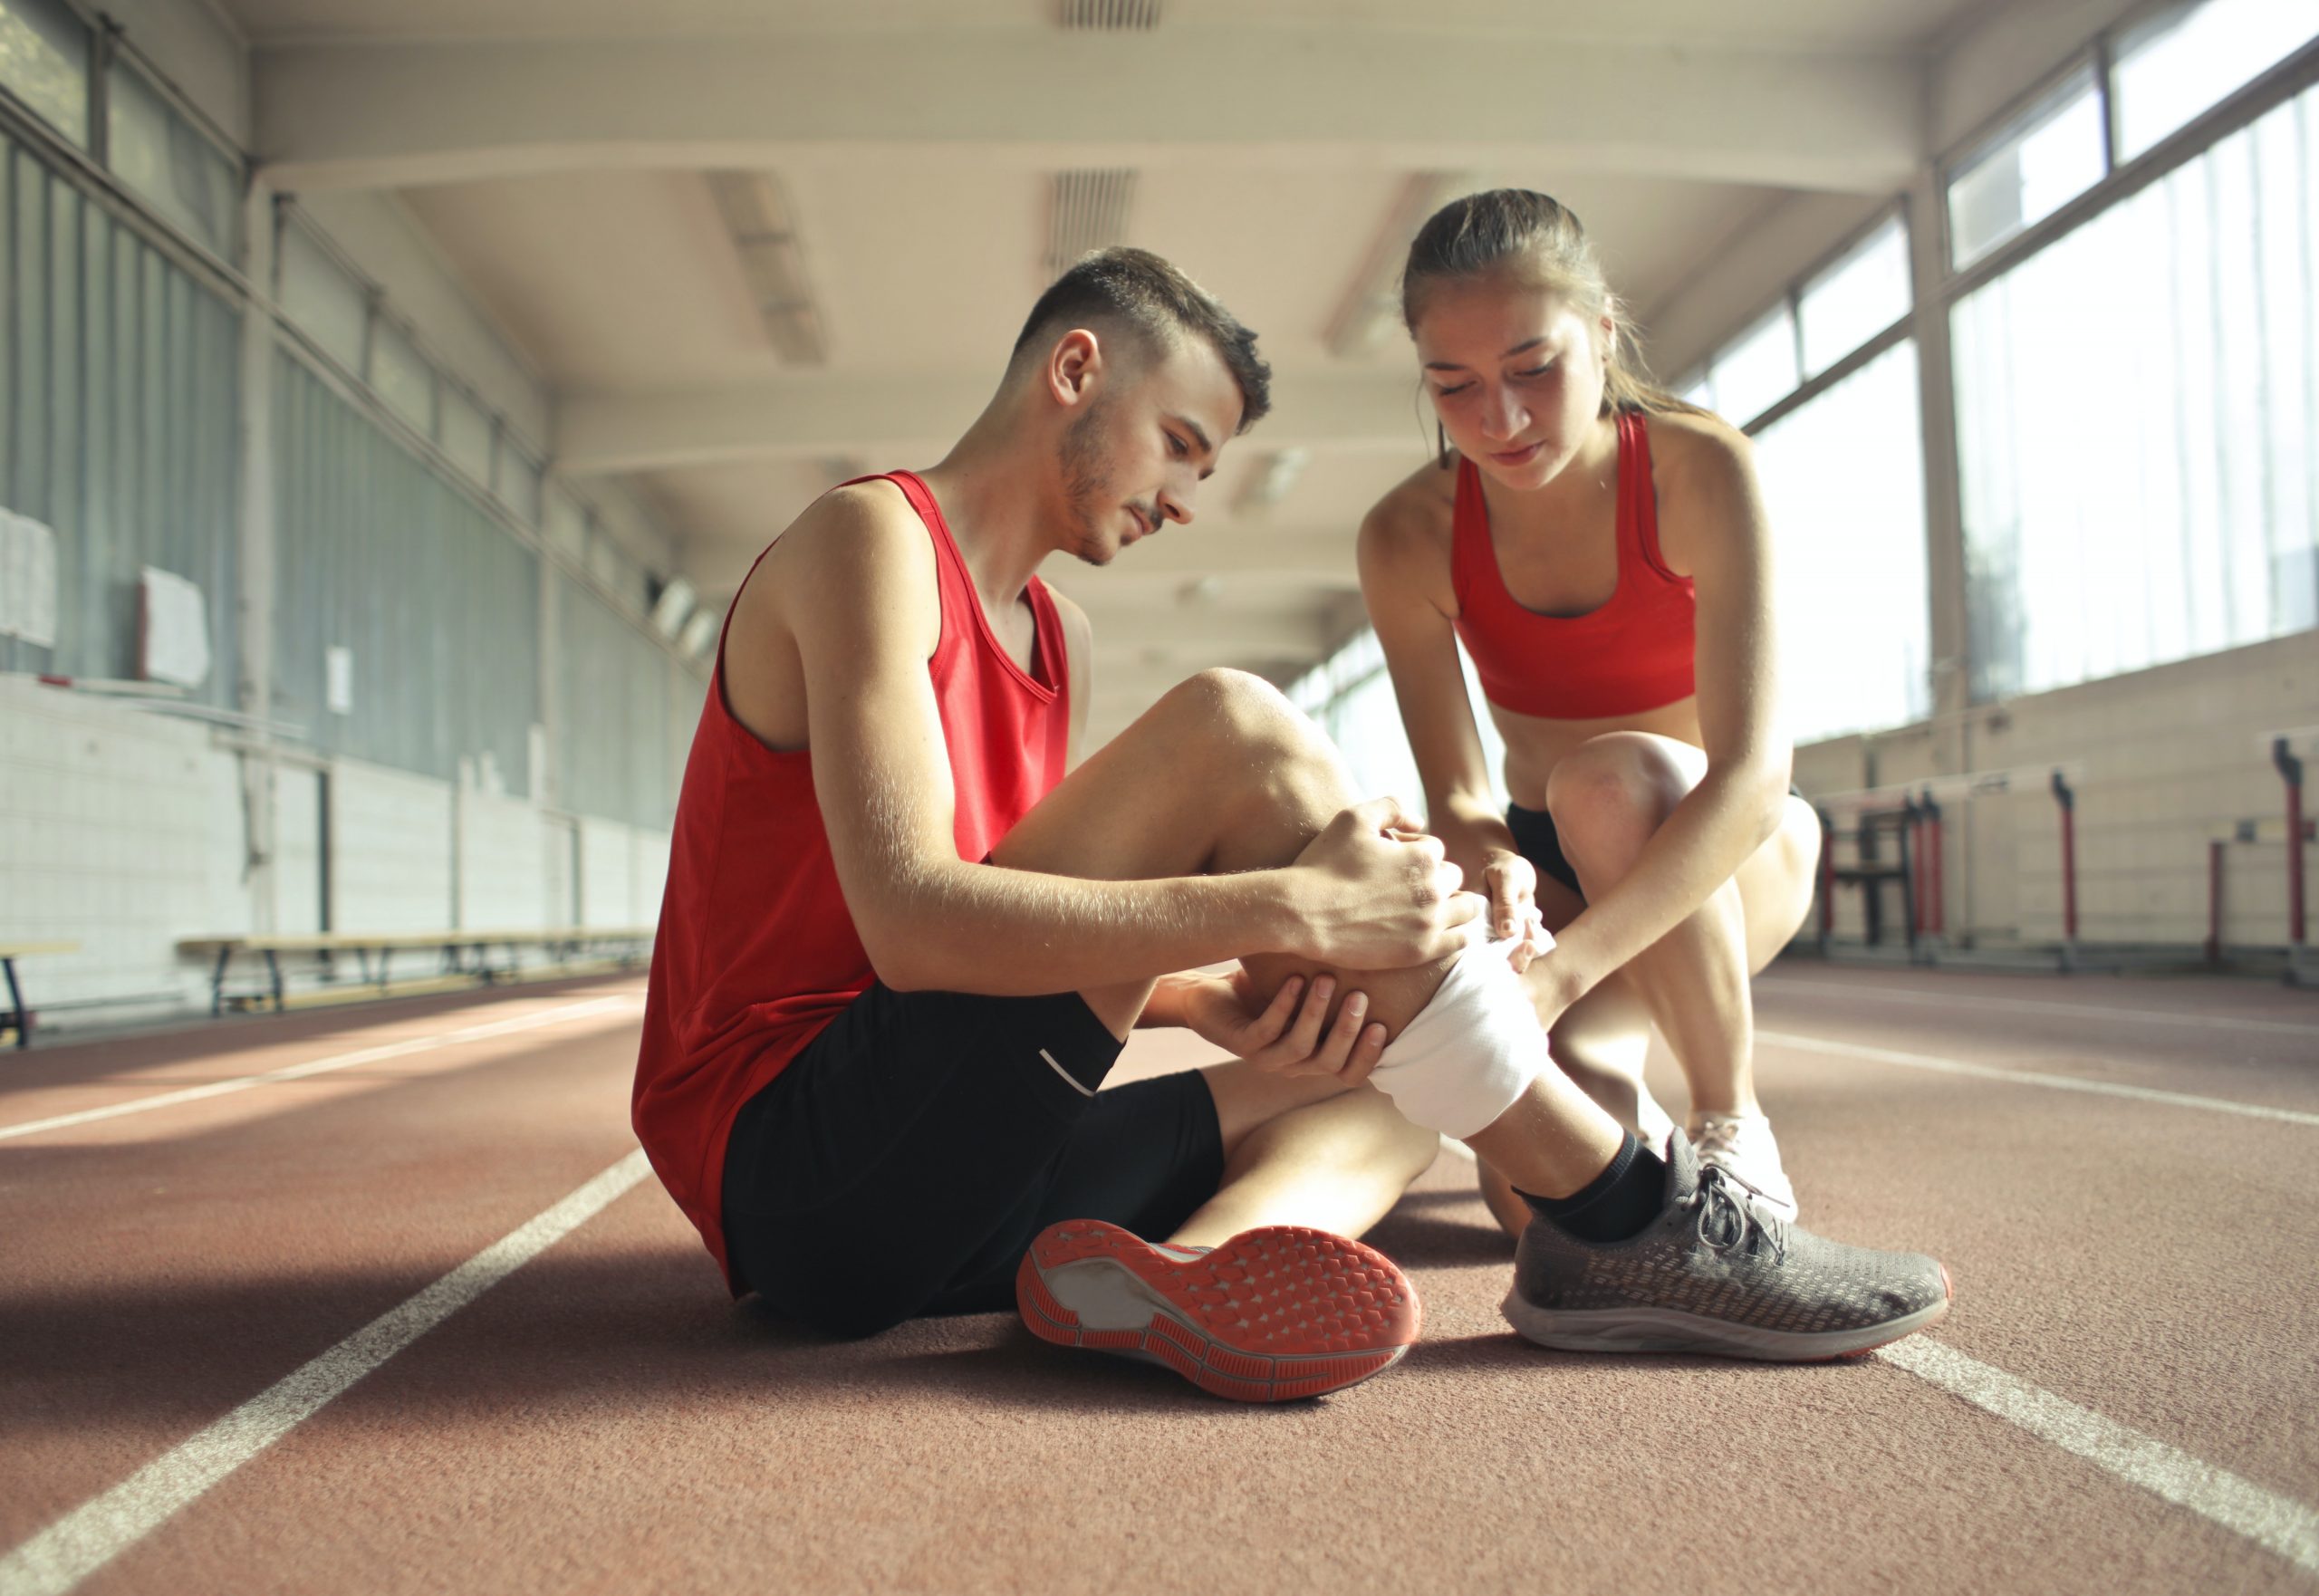 The 5 most common sports injuries